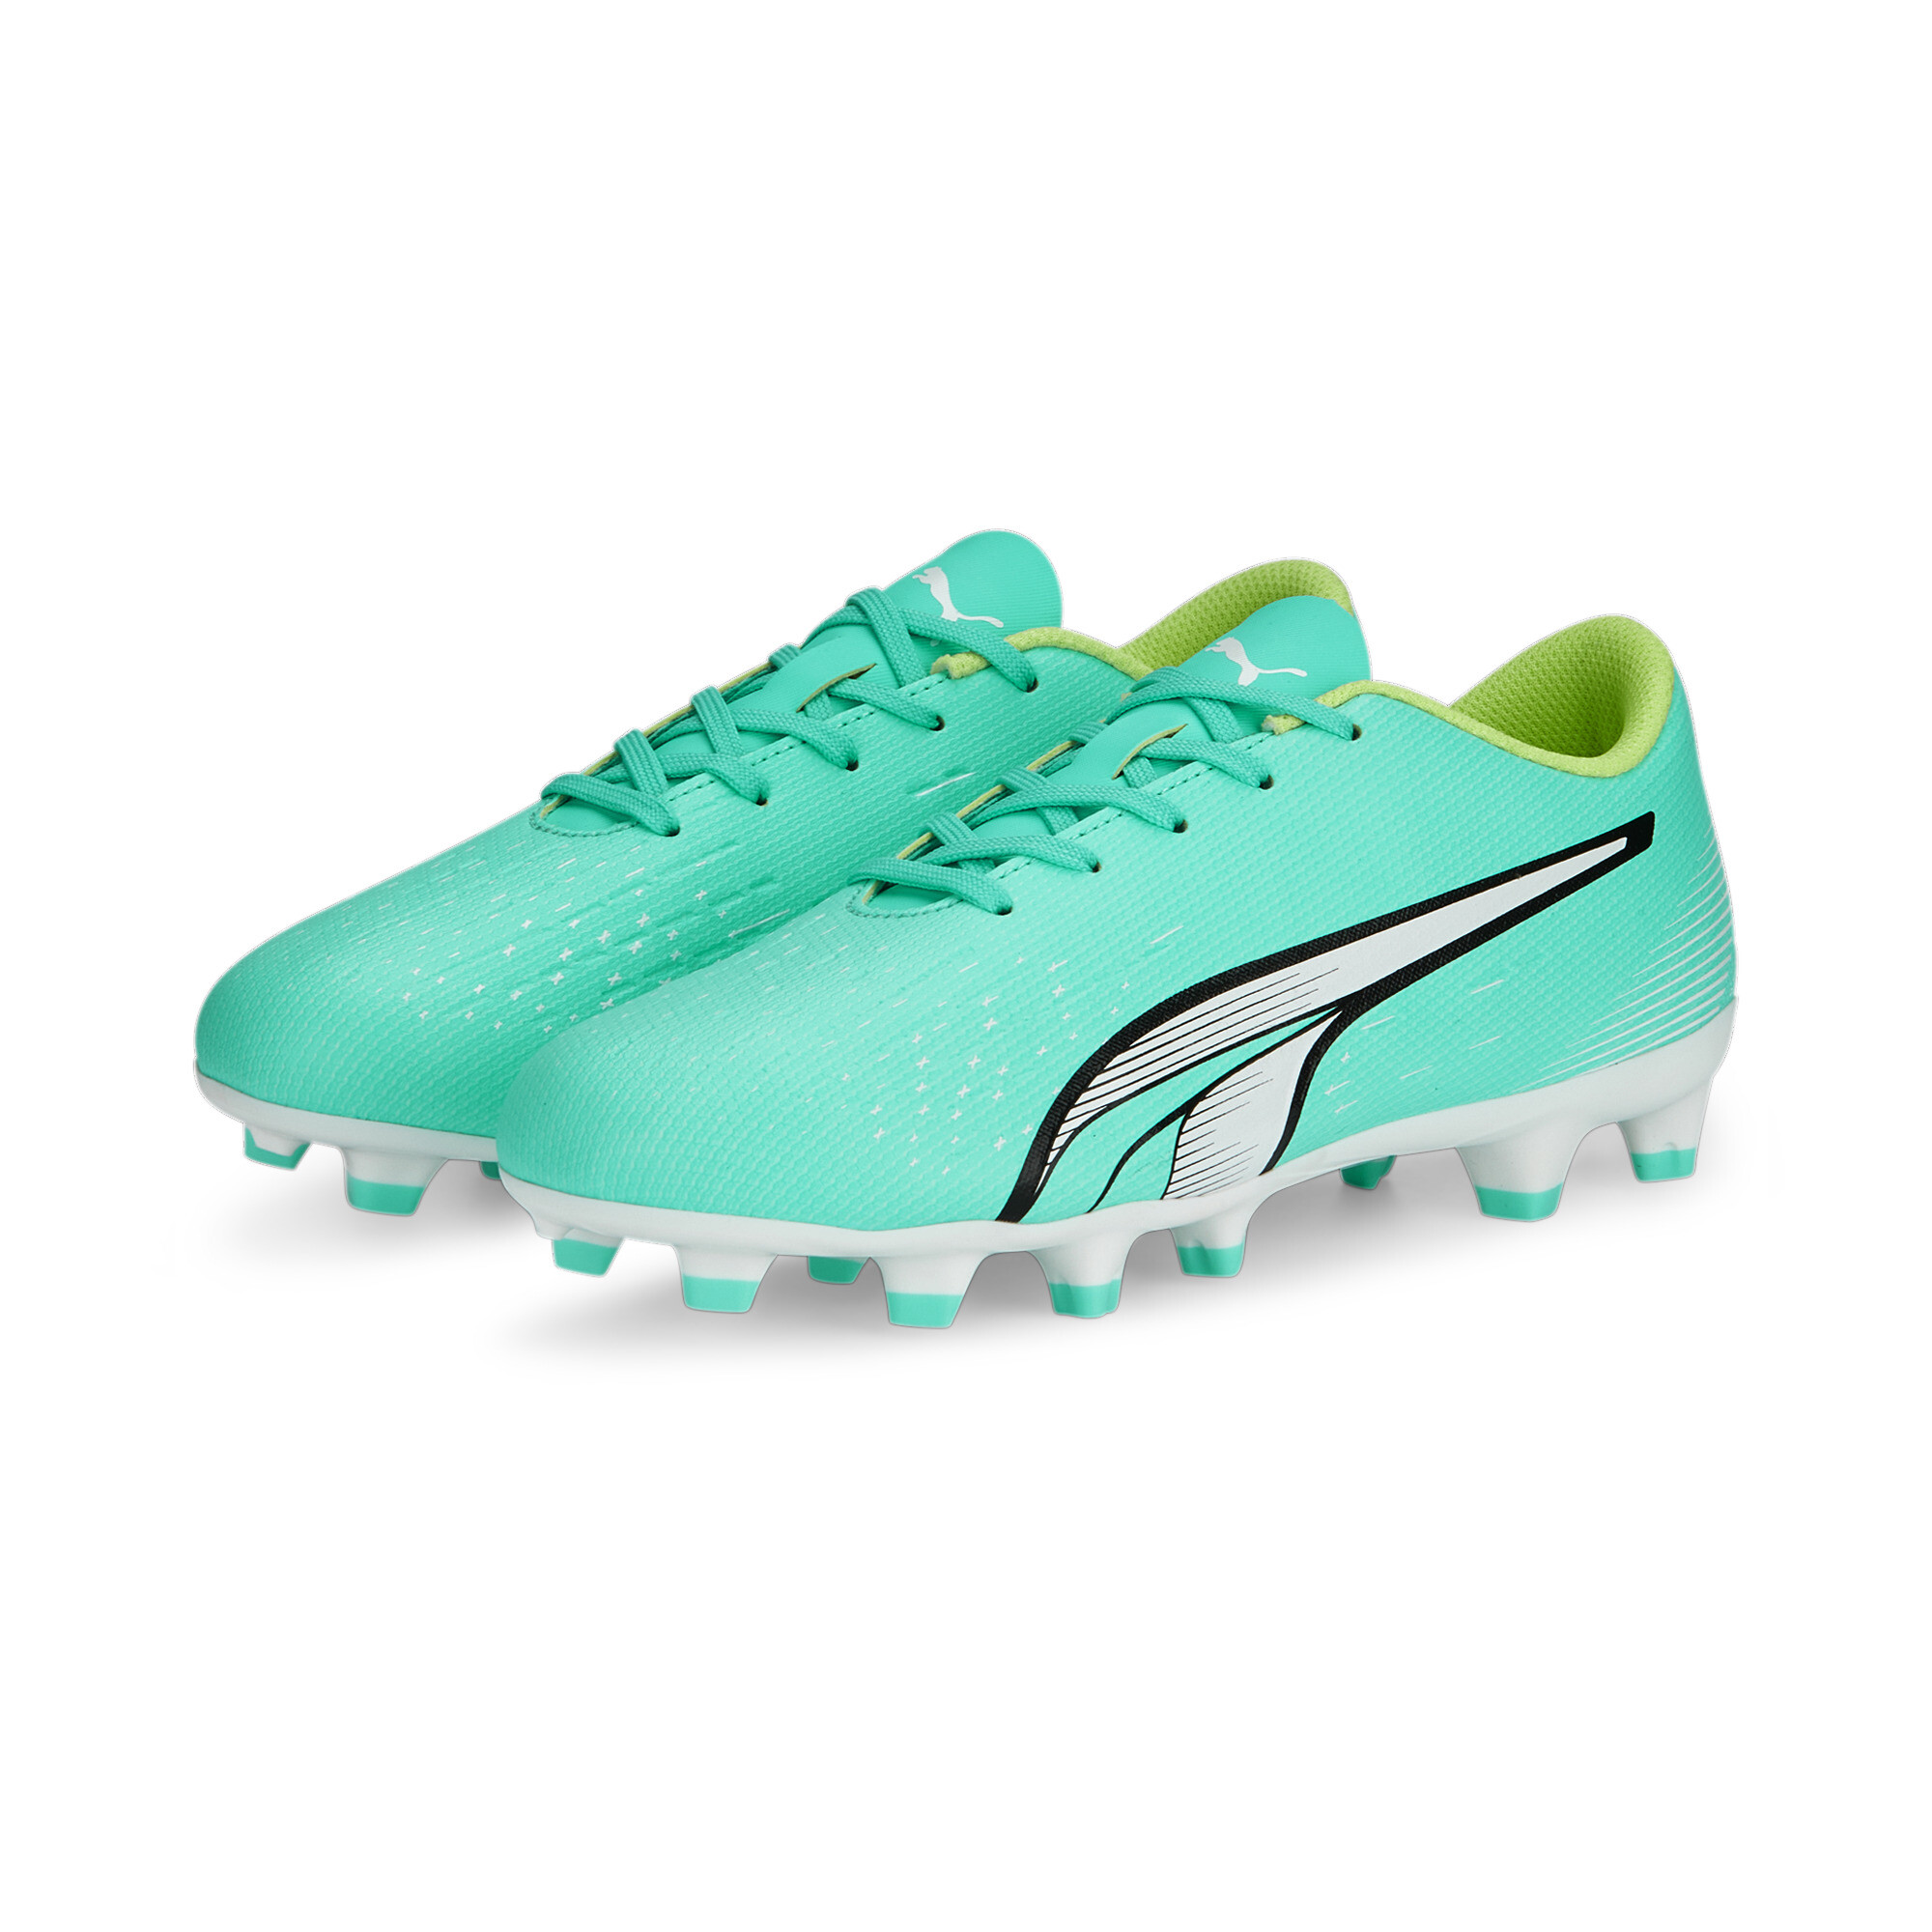 PUMA ULTRA Play FG/AG Football Boots Youth In 40 - Green, Size EU 28.5